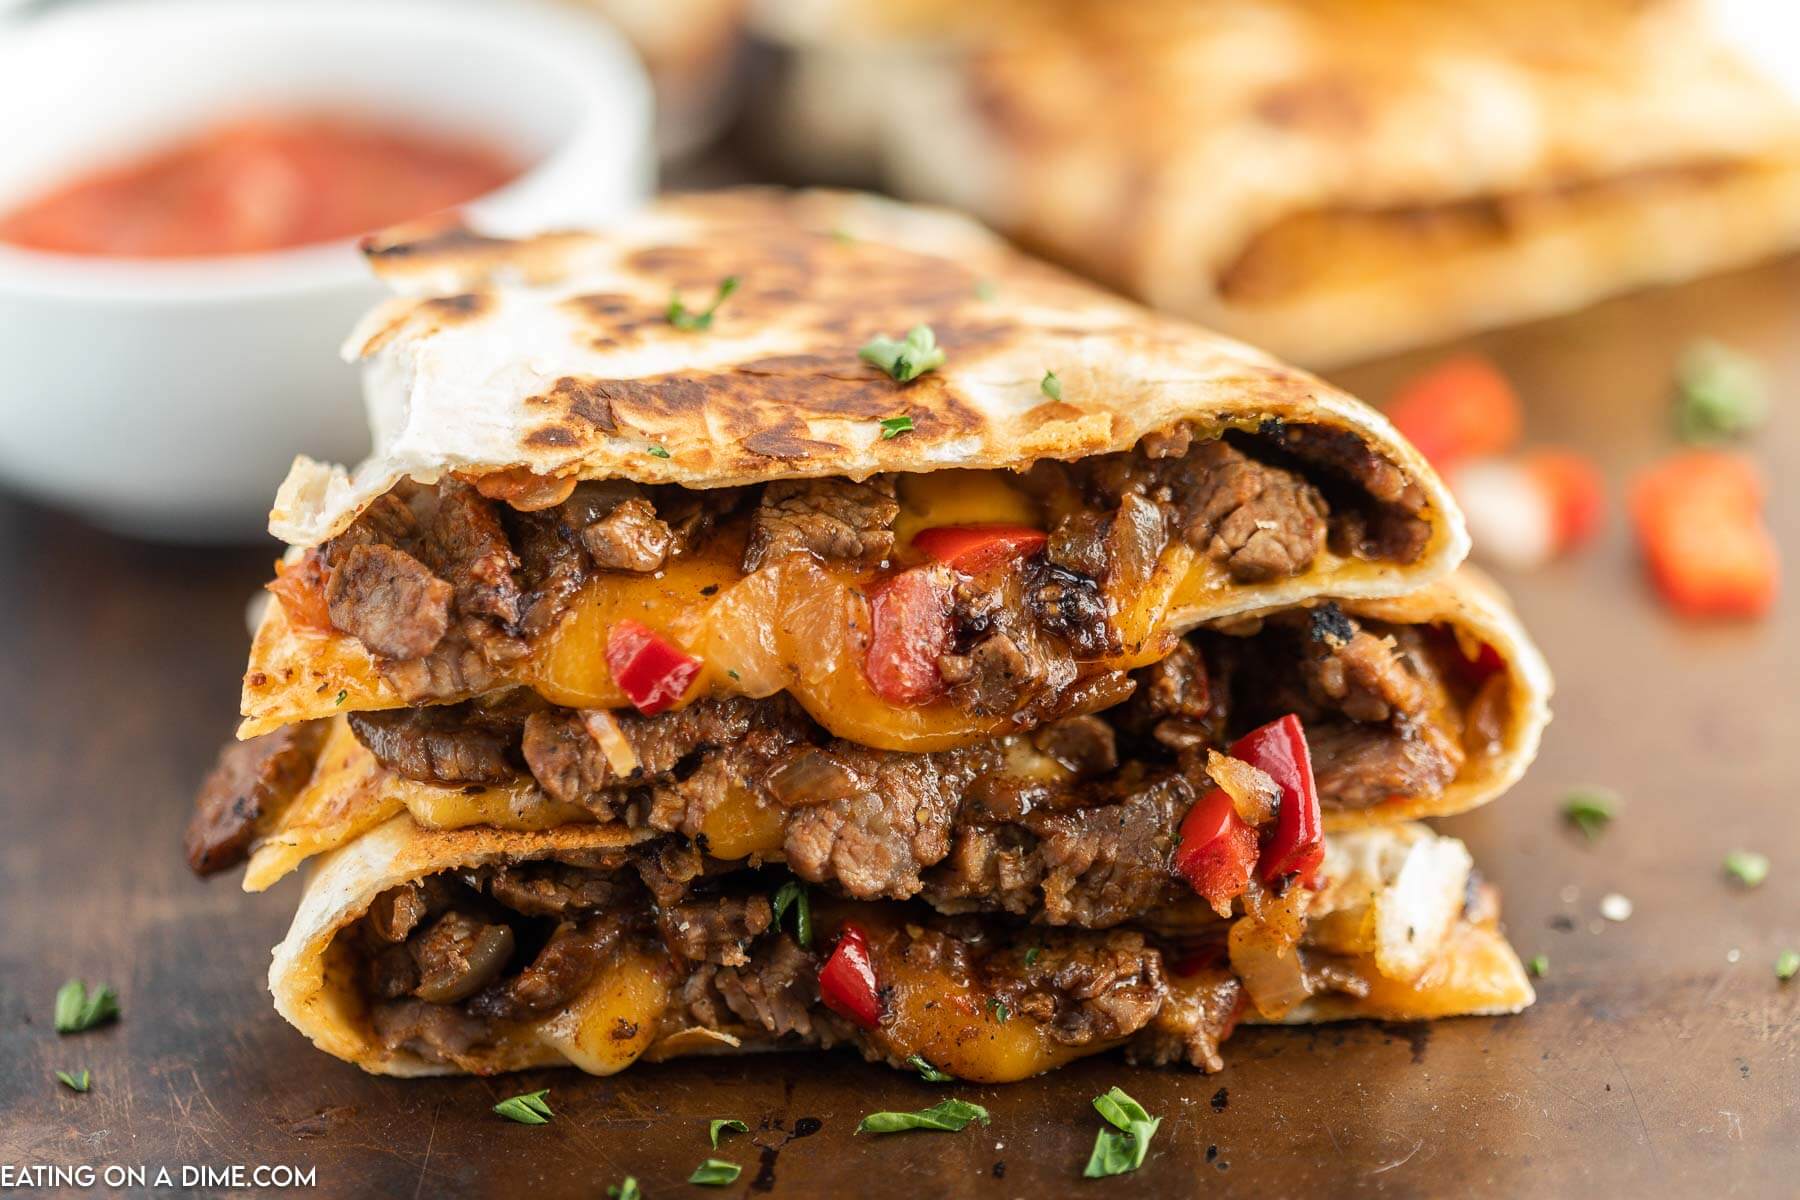 Steak Fajita Quesadillas sliced and stacked with a side of salsa